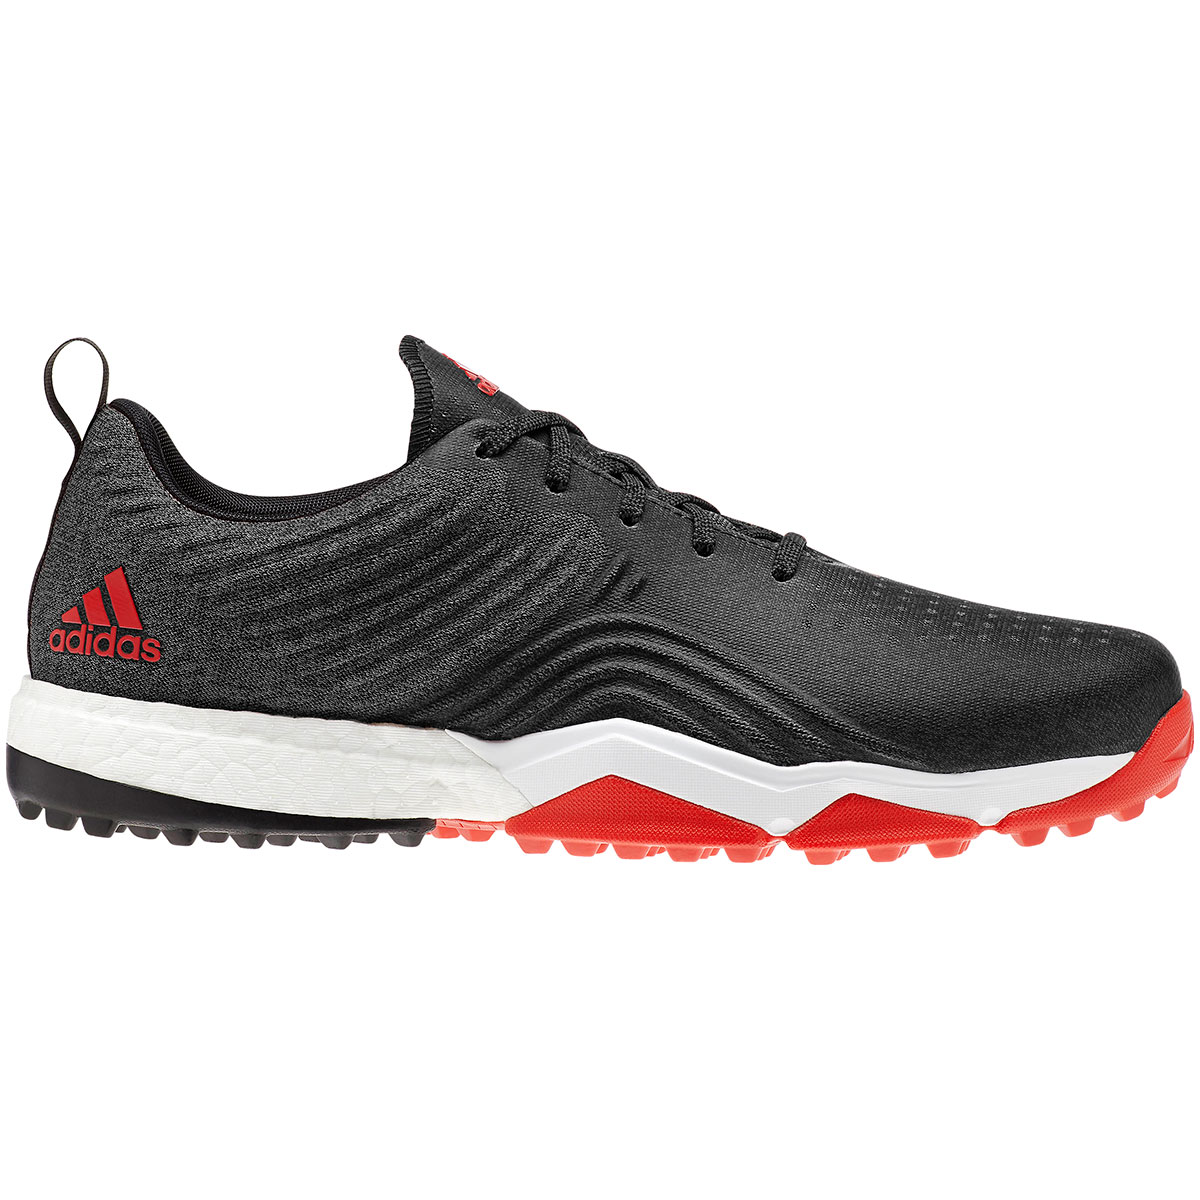 adidas adipower 4orged golf shoes review